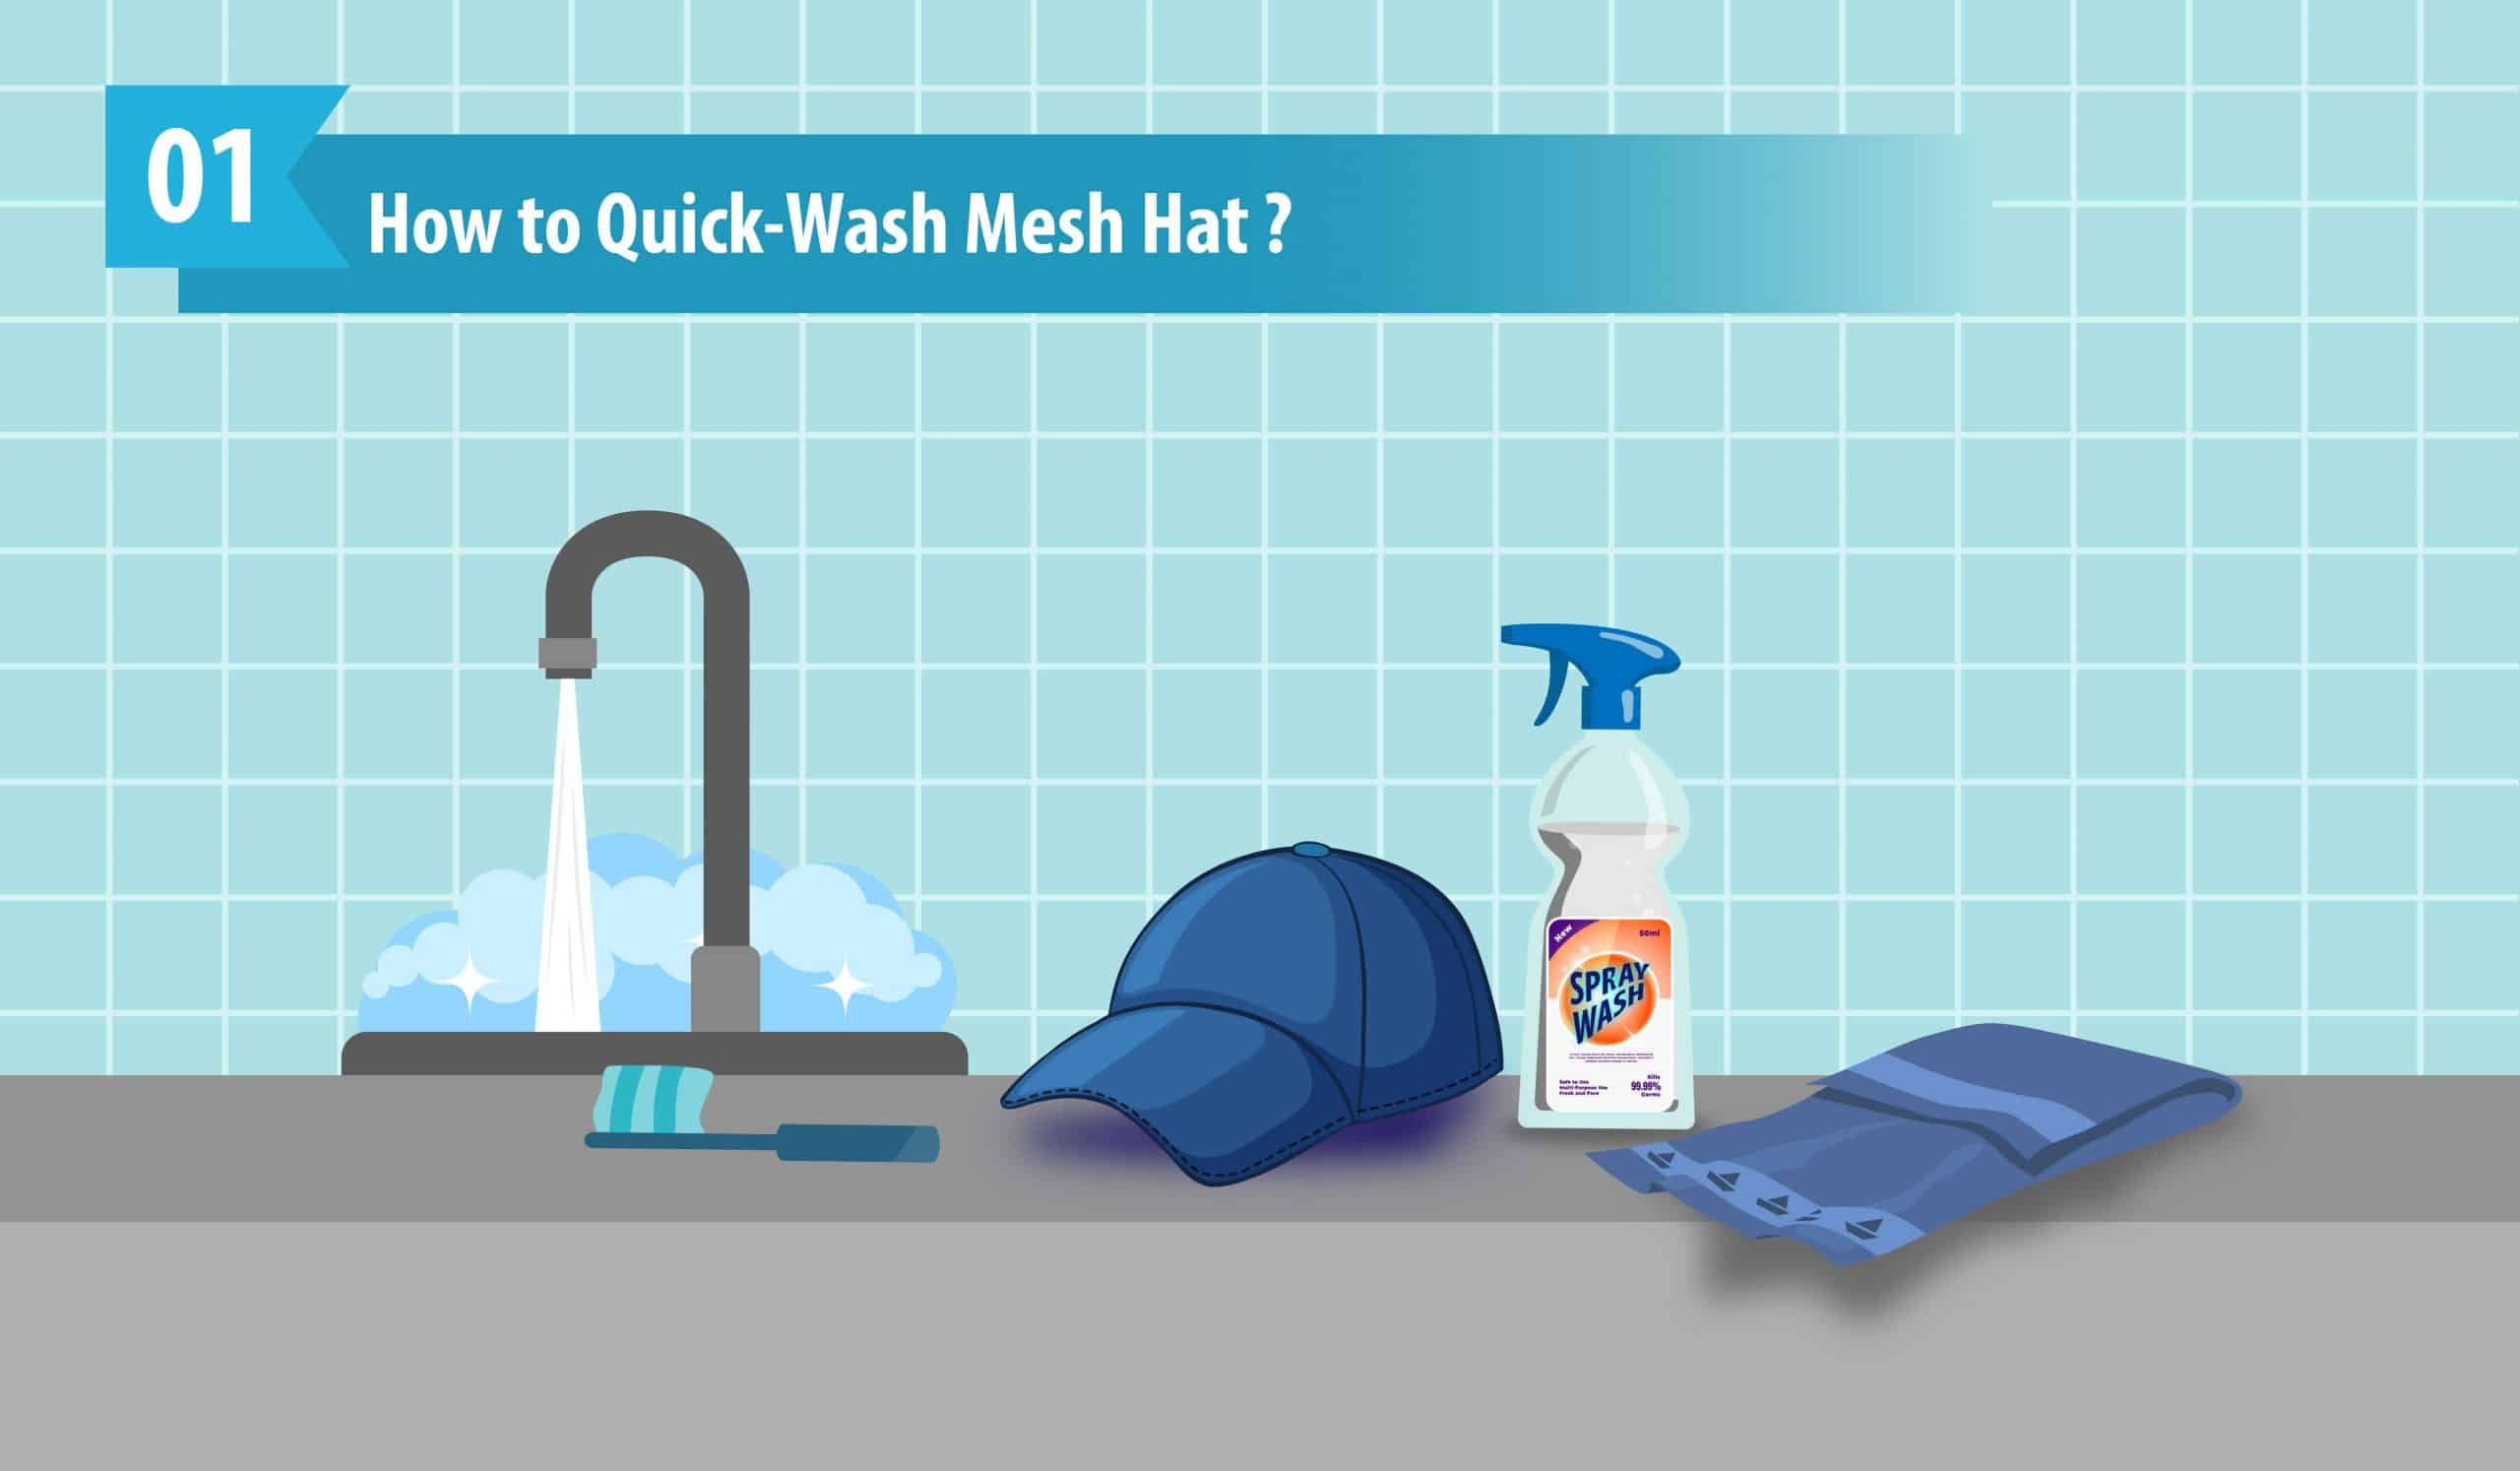 How to Quick-Wash Mesh Hat